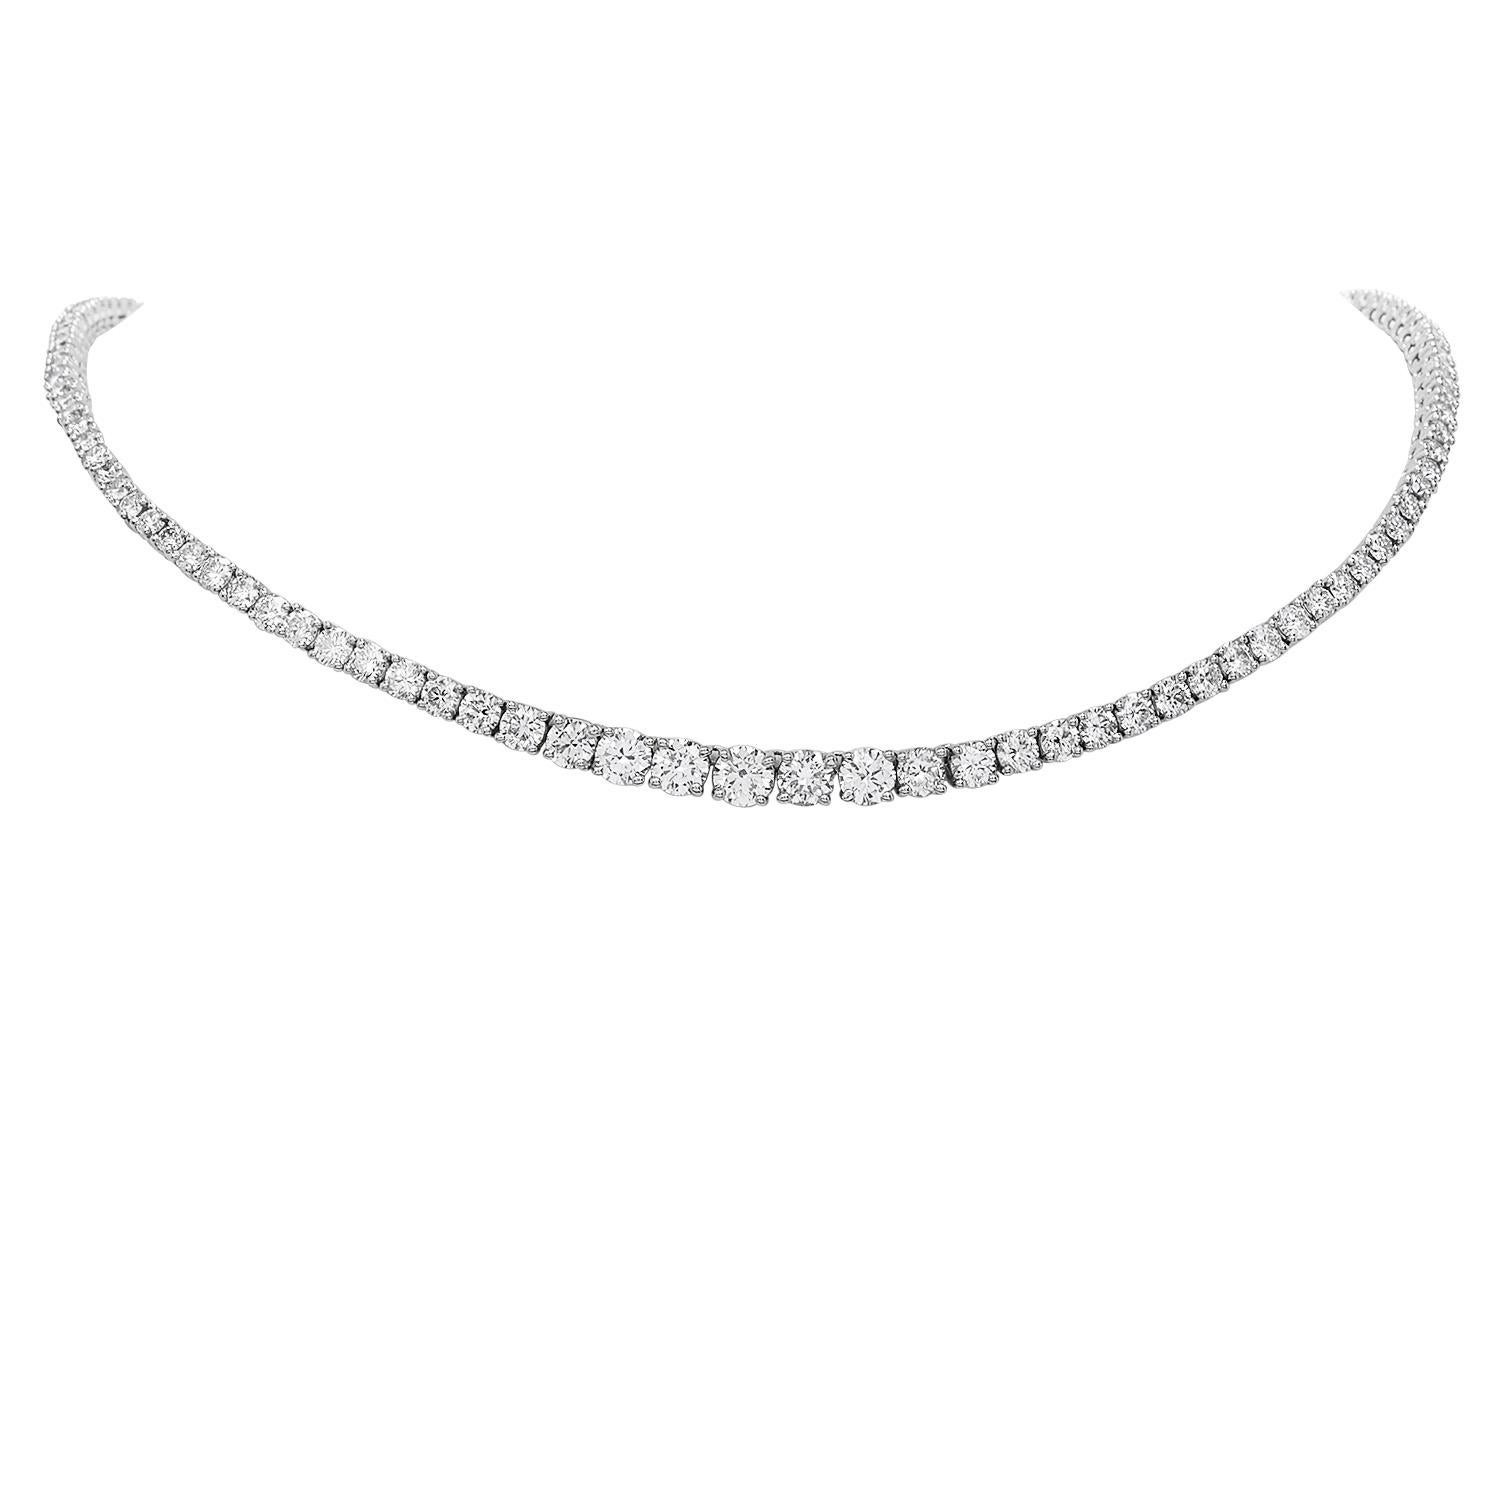 Simply Stated.......Stunning!
This Diamond Necklace was inspired by a Riviera design and crafted in platinum.

Tapering from   4.2mm to 2.50mm. This necklace features beautifully matched bright white Diamonds
from end to end.  Weighing collectively